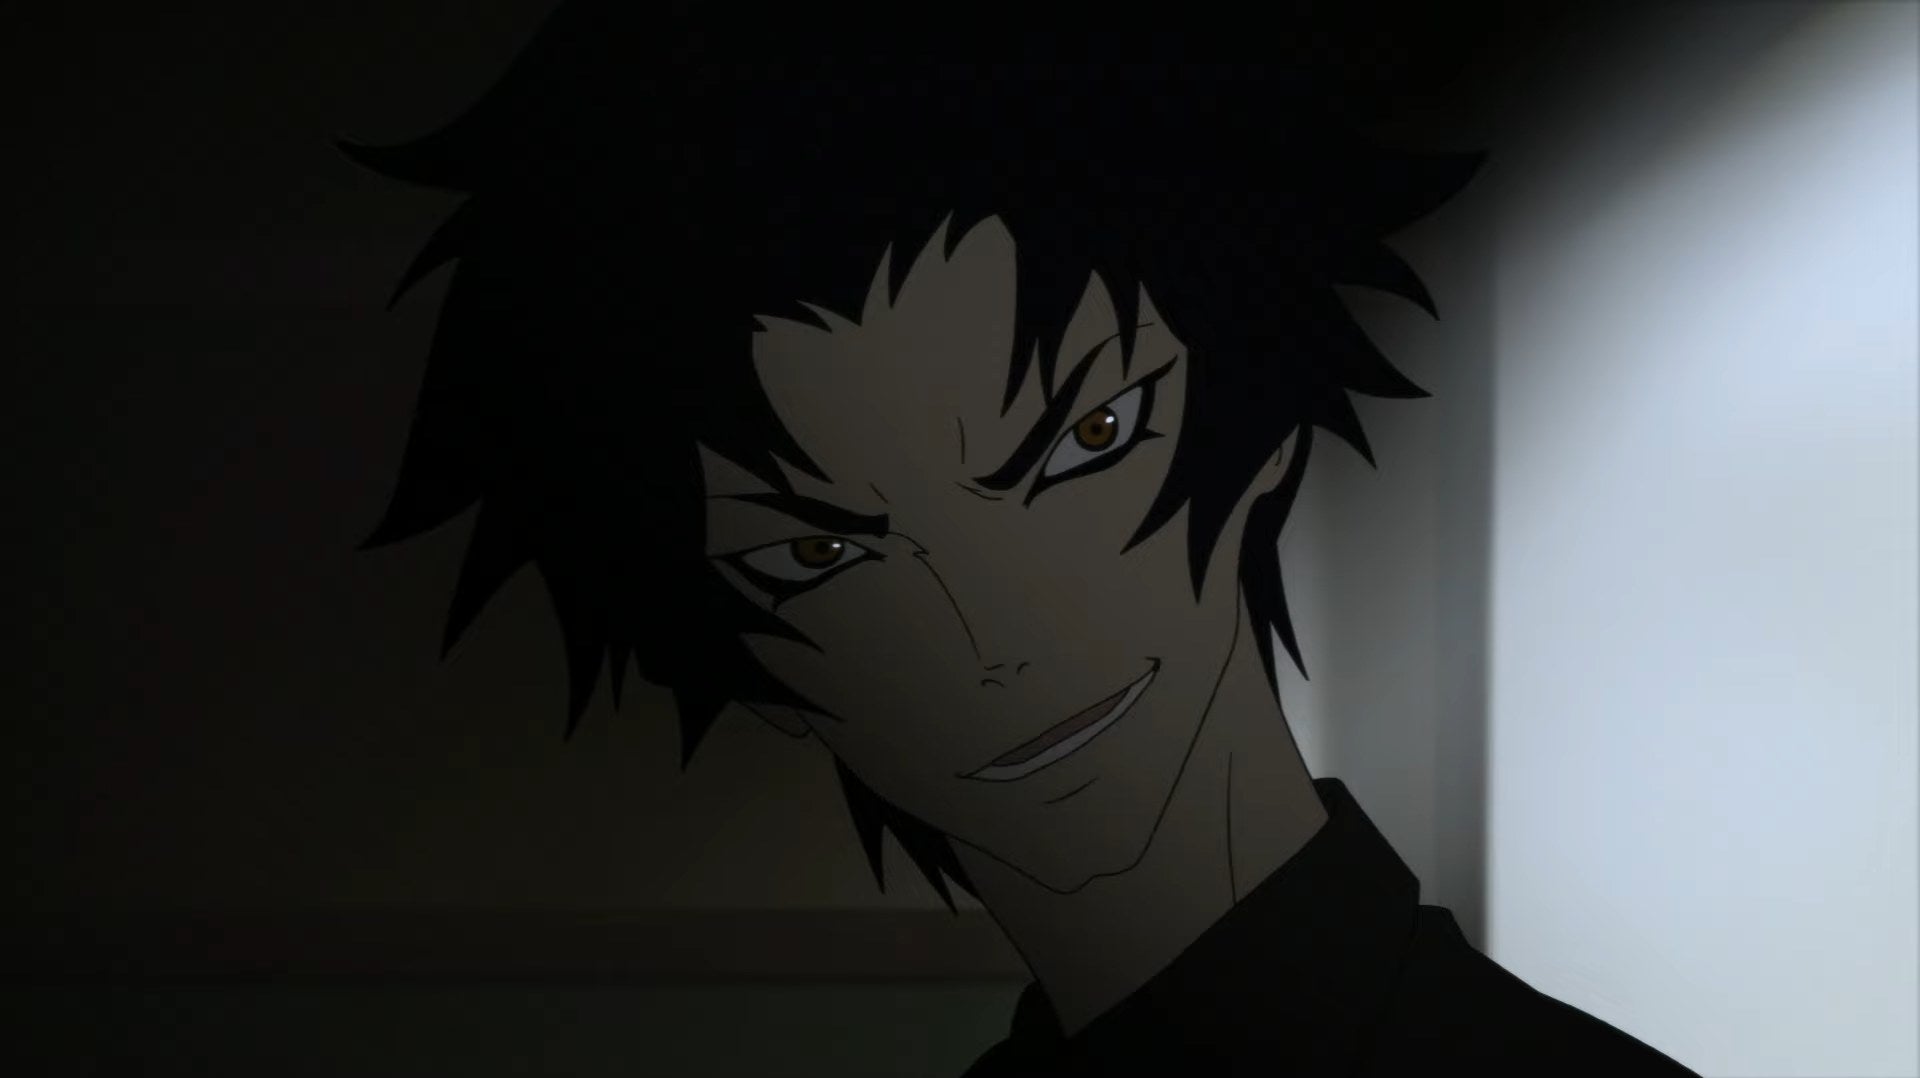 Akira Fudo in a dimly lit room in &quot;Devilman Crybaby&quot;